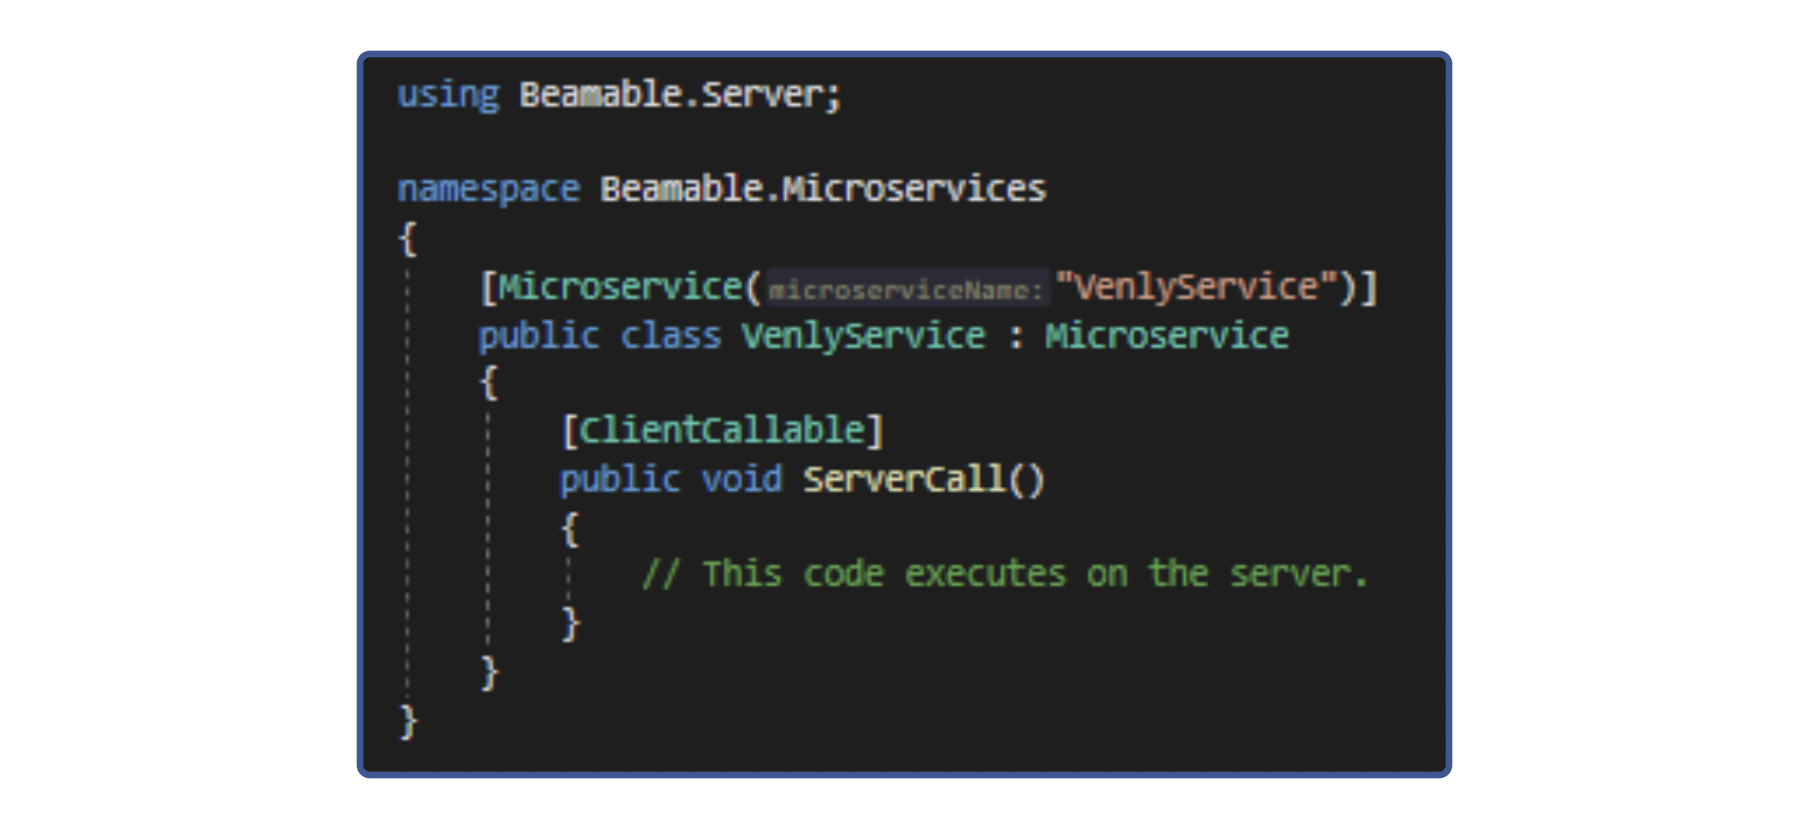 Default generated code of the Microservice class